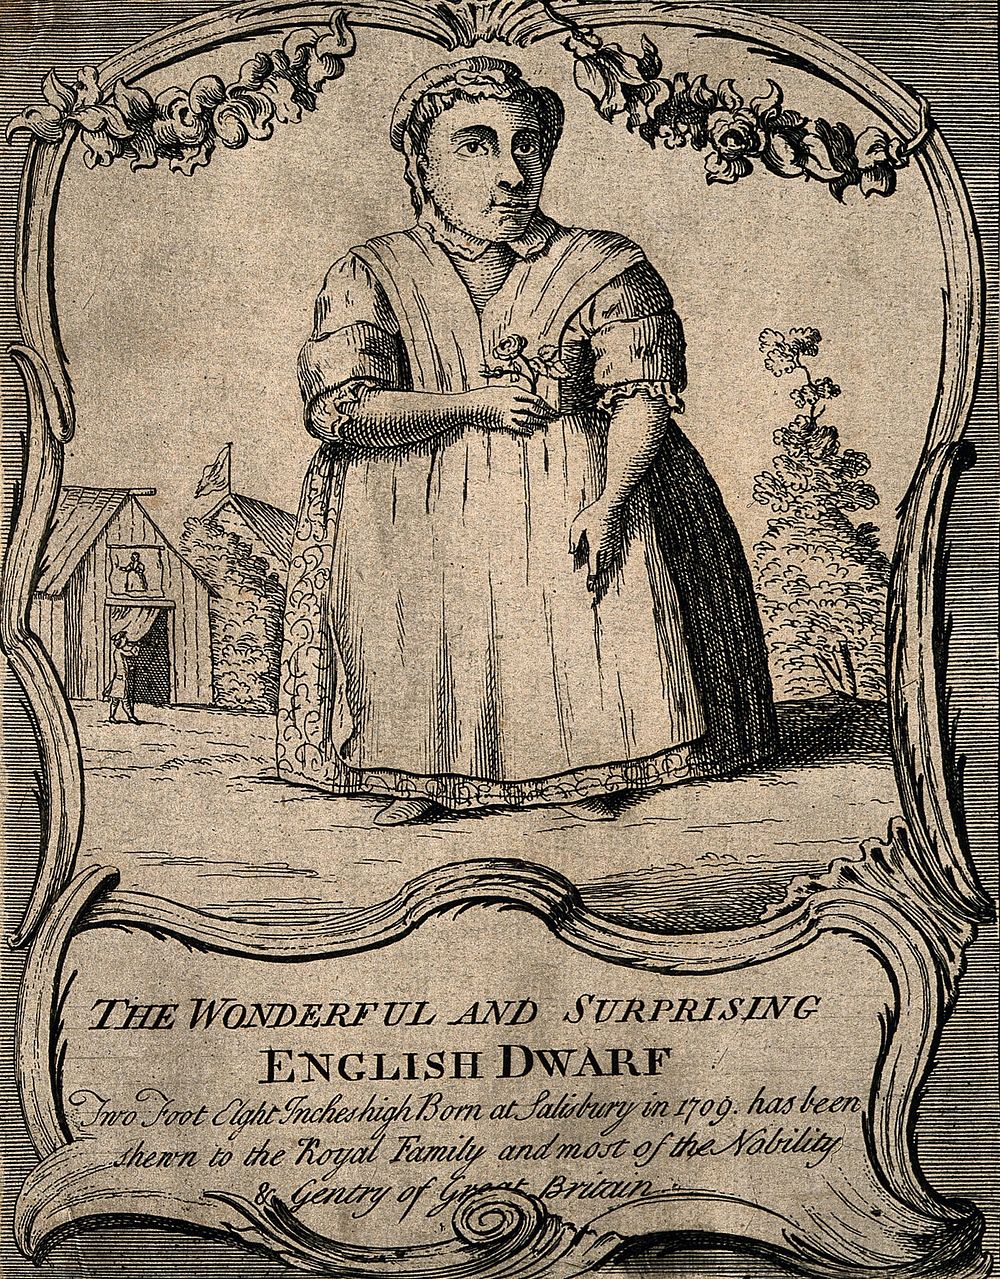 A female dwarf, holding a flower, in a country setting. Etching.